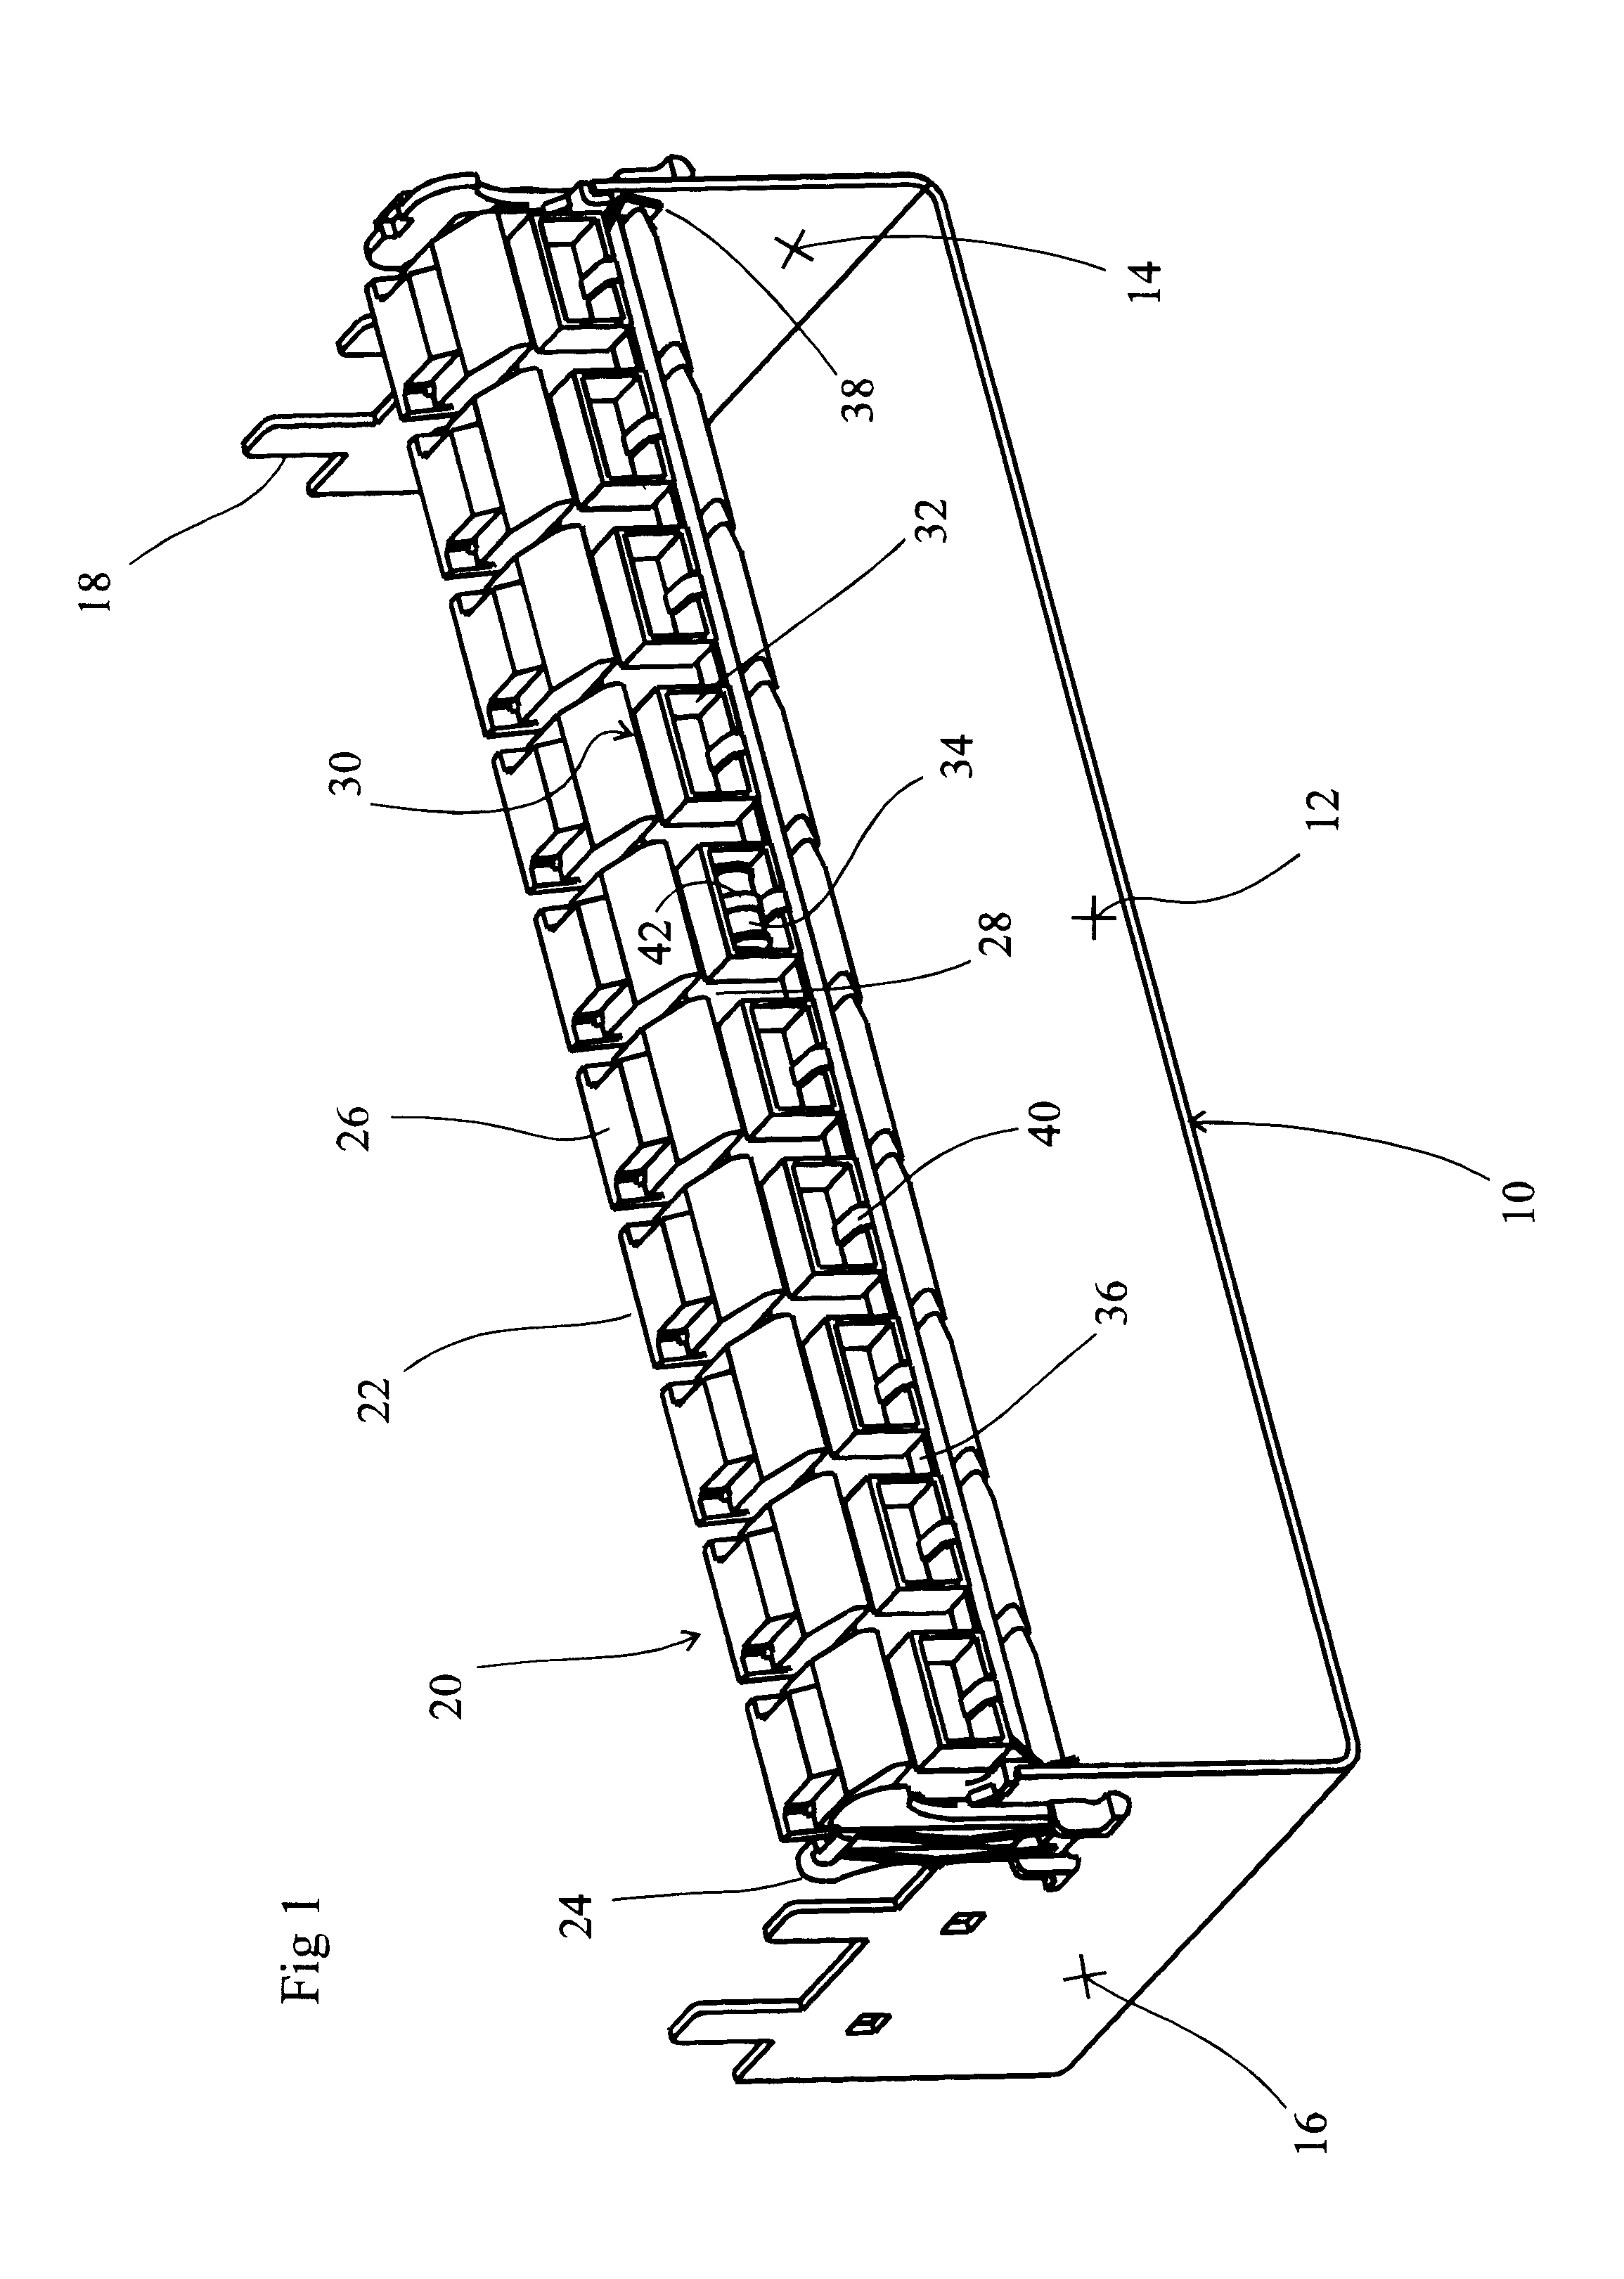 Electrical terminal array with insulation displacement connectors and surge arrestors